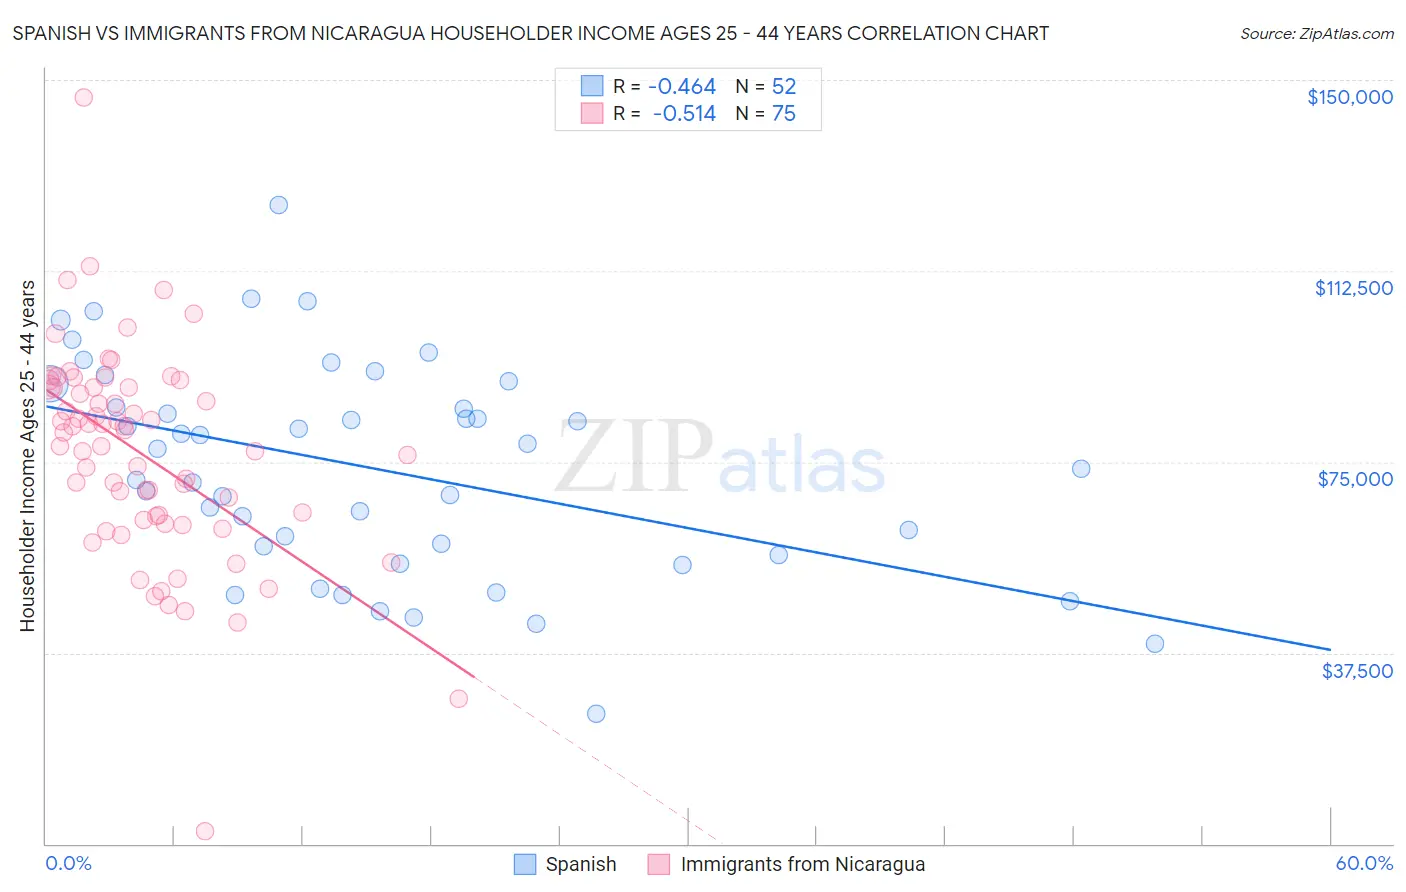 Spanish vs Immigrants from Nicaragua Householder Income Ages 25 - 44 years